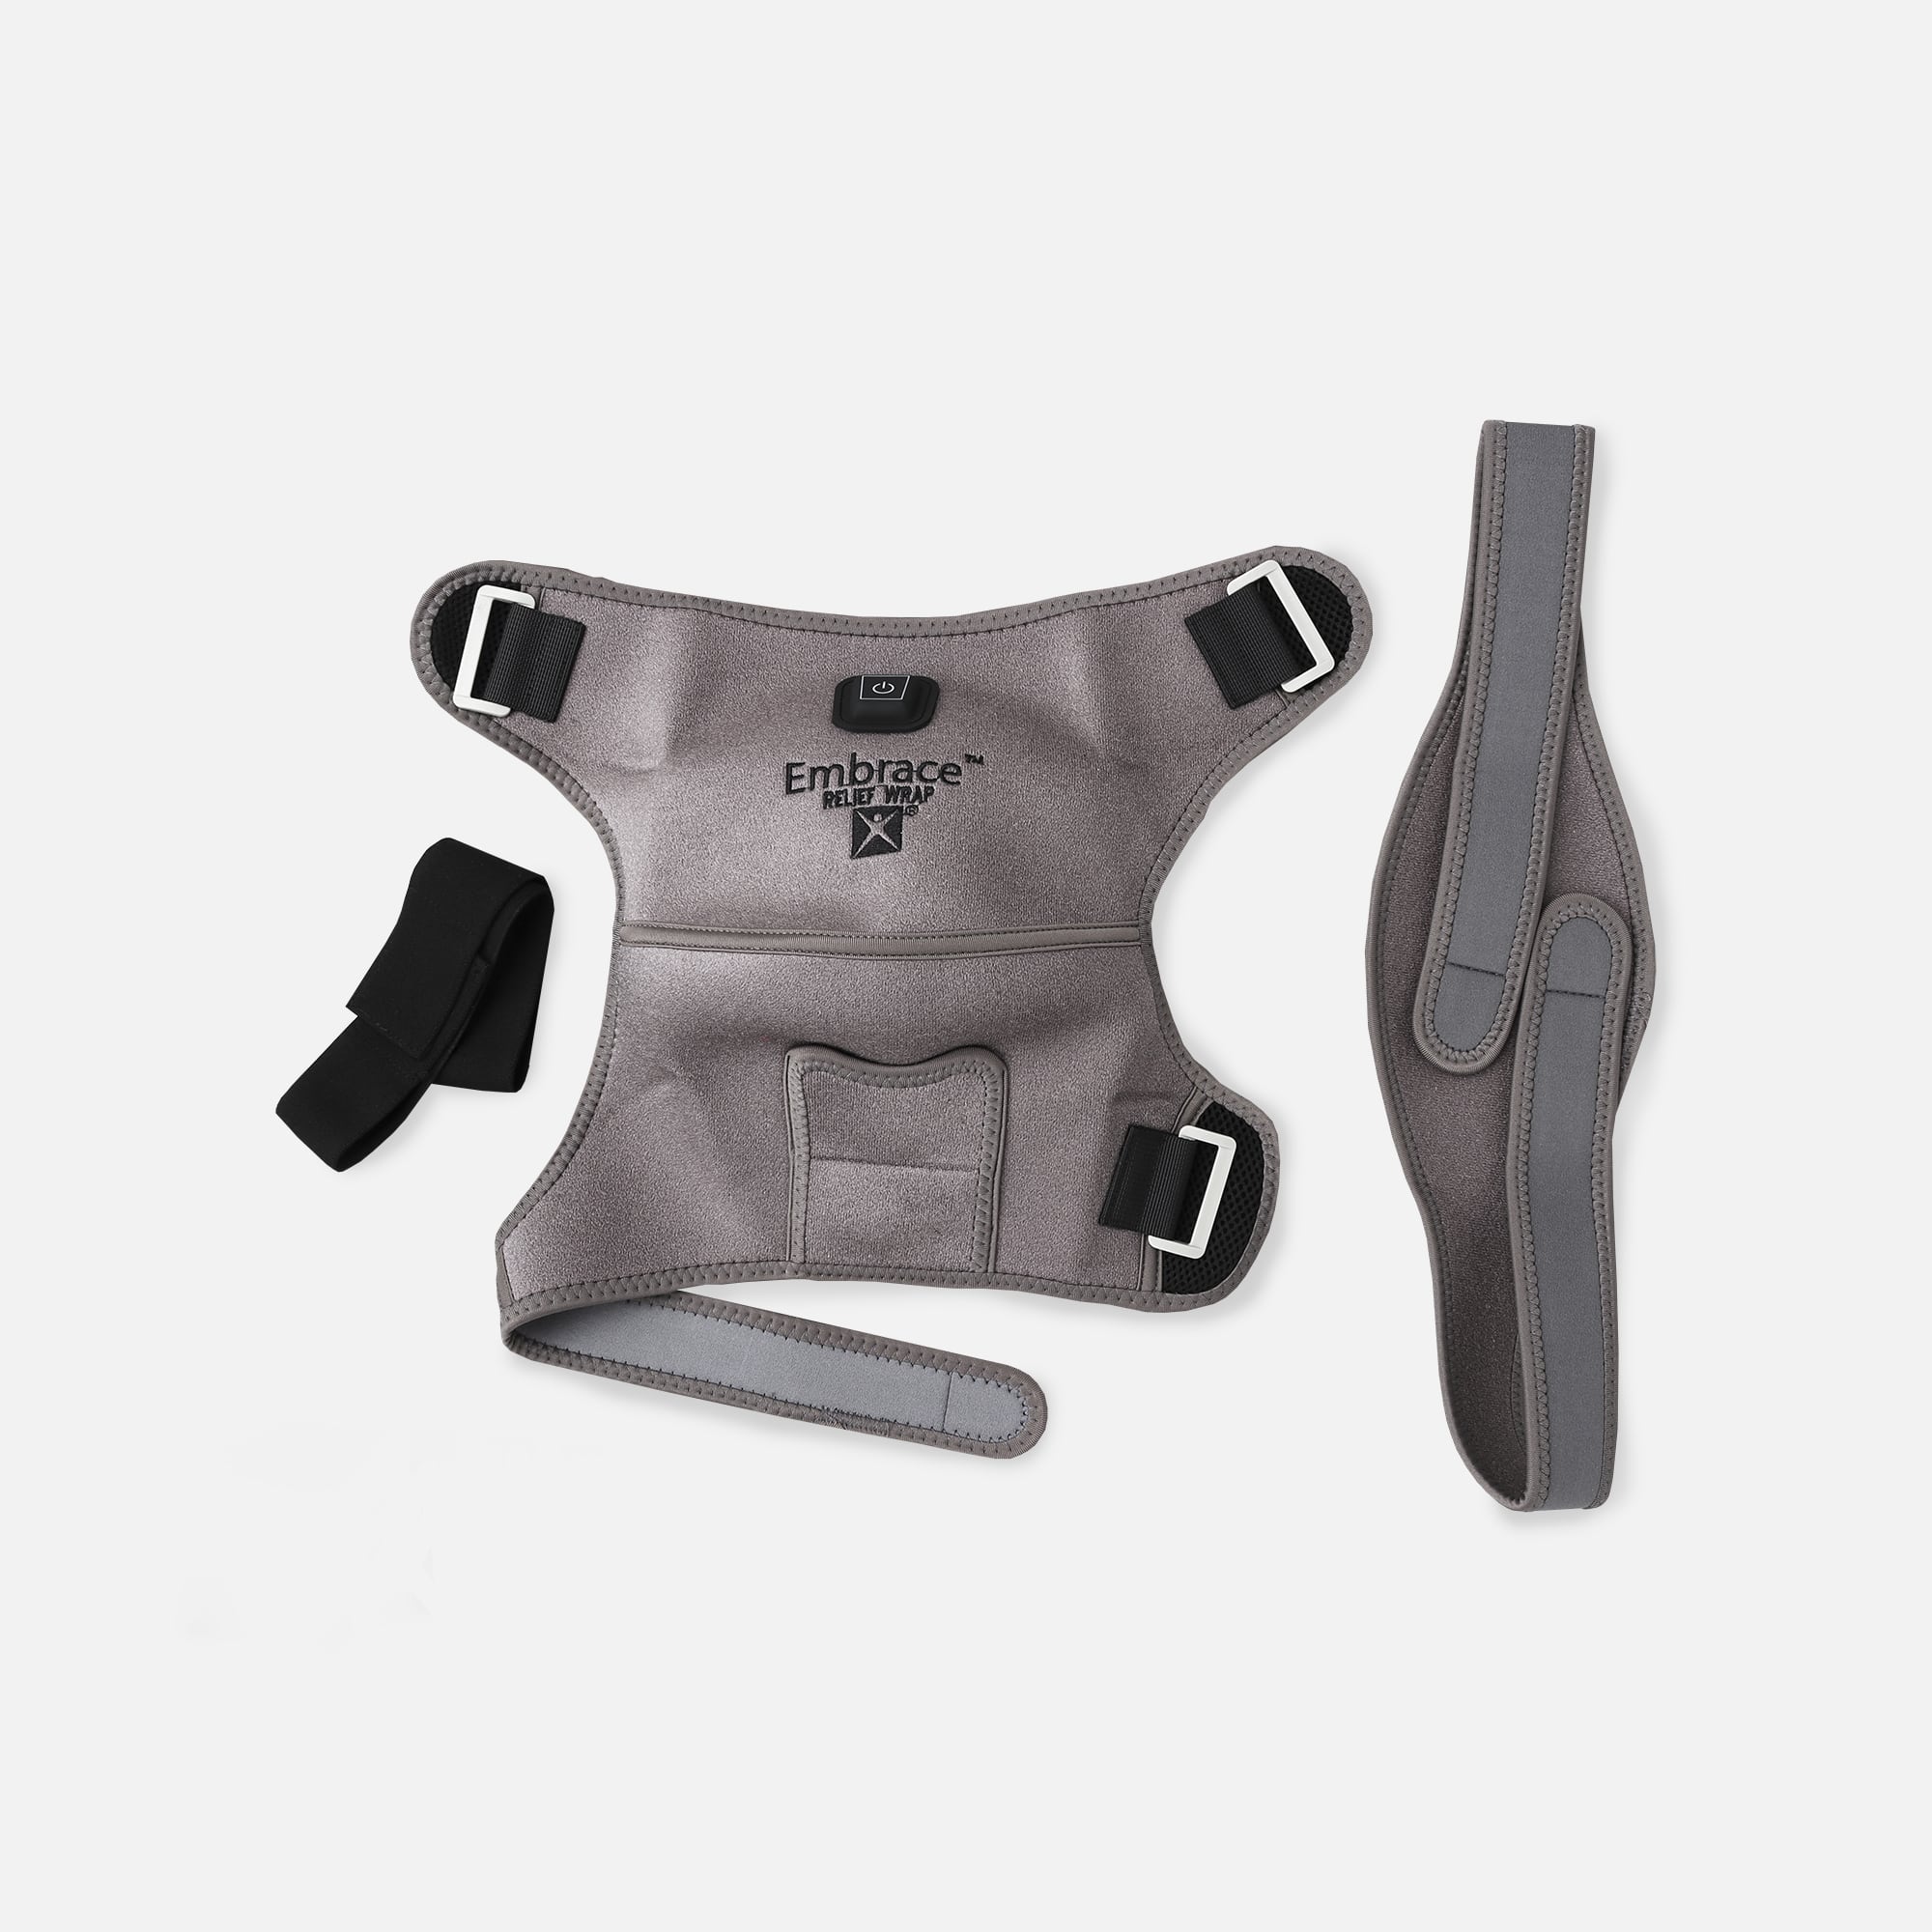 https://hsastore.com/on/demandware.static/-/Sites-hec-master/default/dw468328d5/images/large/battle-creek-embrace-relief-shoulder-wrap-portable-3-temperature-settings-auto-shut-off-wireless-rechargeable-wrap-battery-operated-heat-therapy-wrap-for-rotator-cuff-and-shoulder-pain-relief-29571-02.jpg